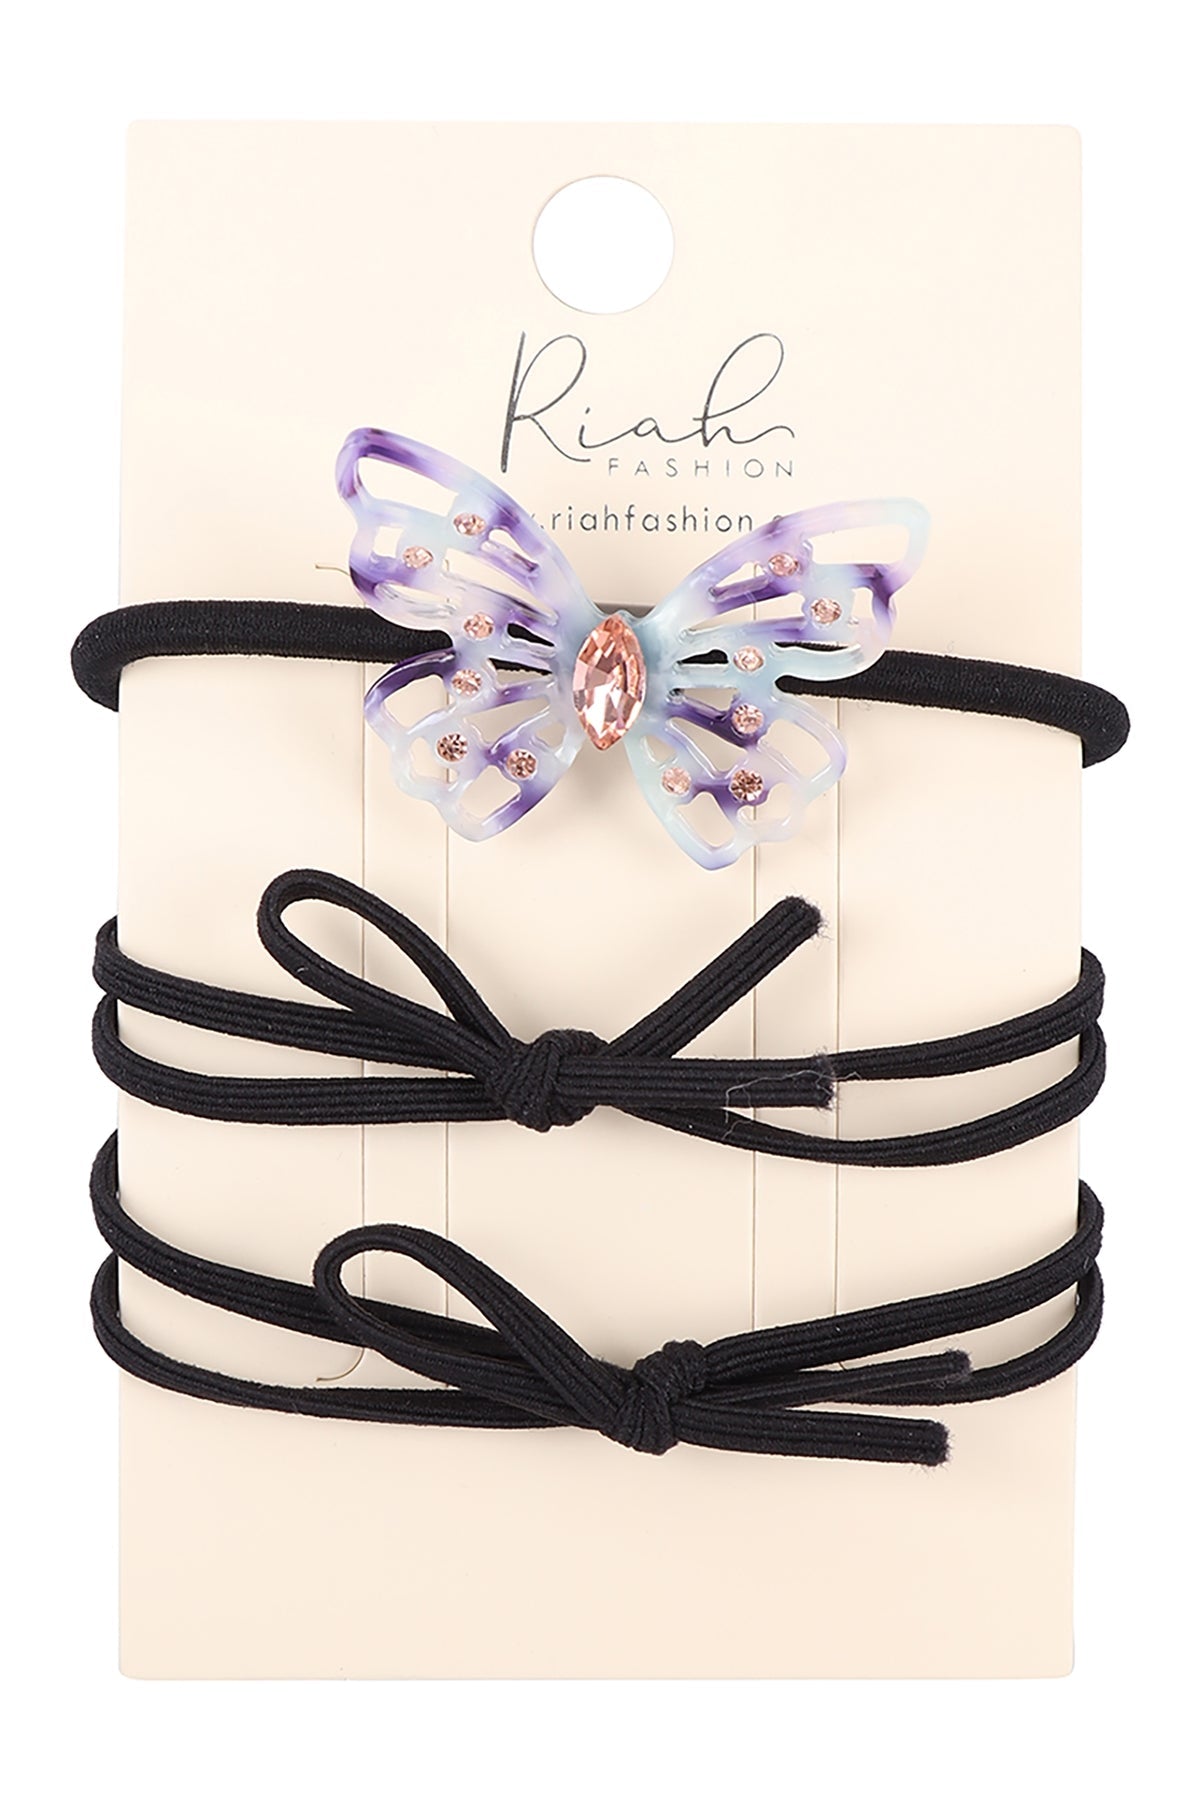 BUTTERFLY HAIR BAND6PCS (NOW $1.00 ONLY!)